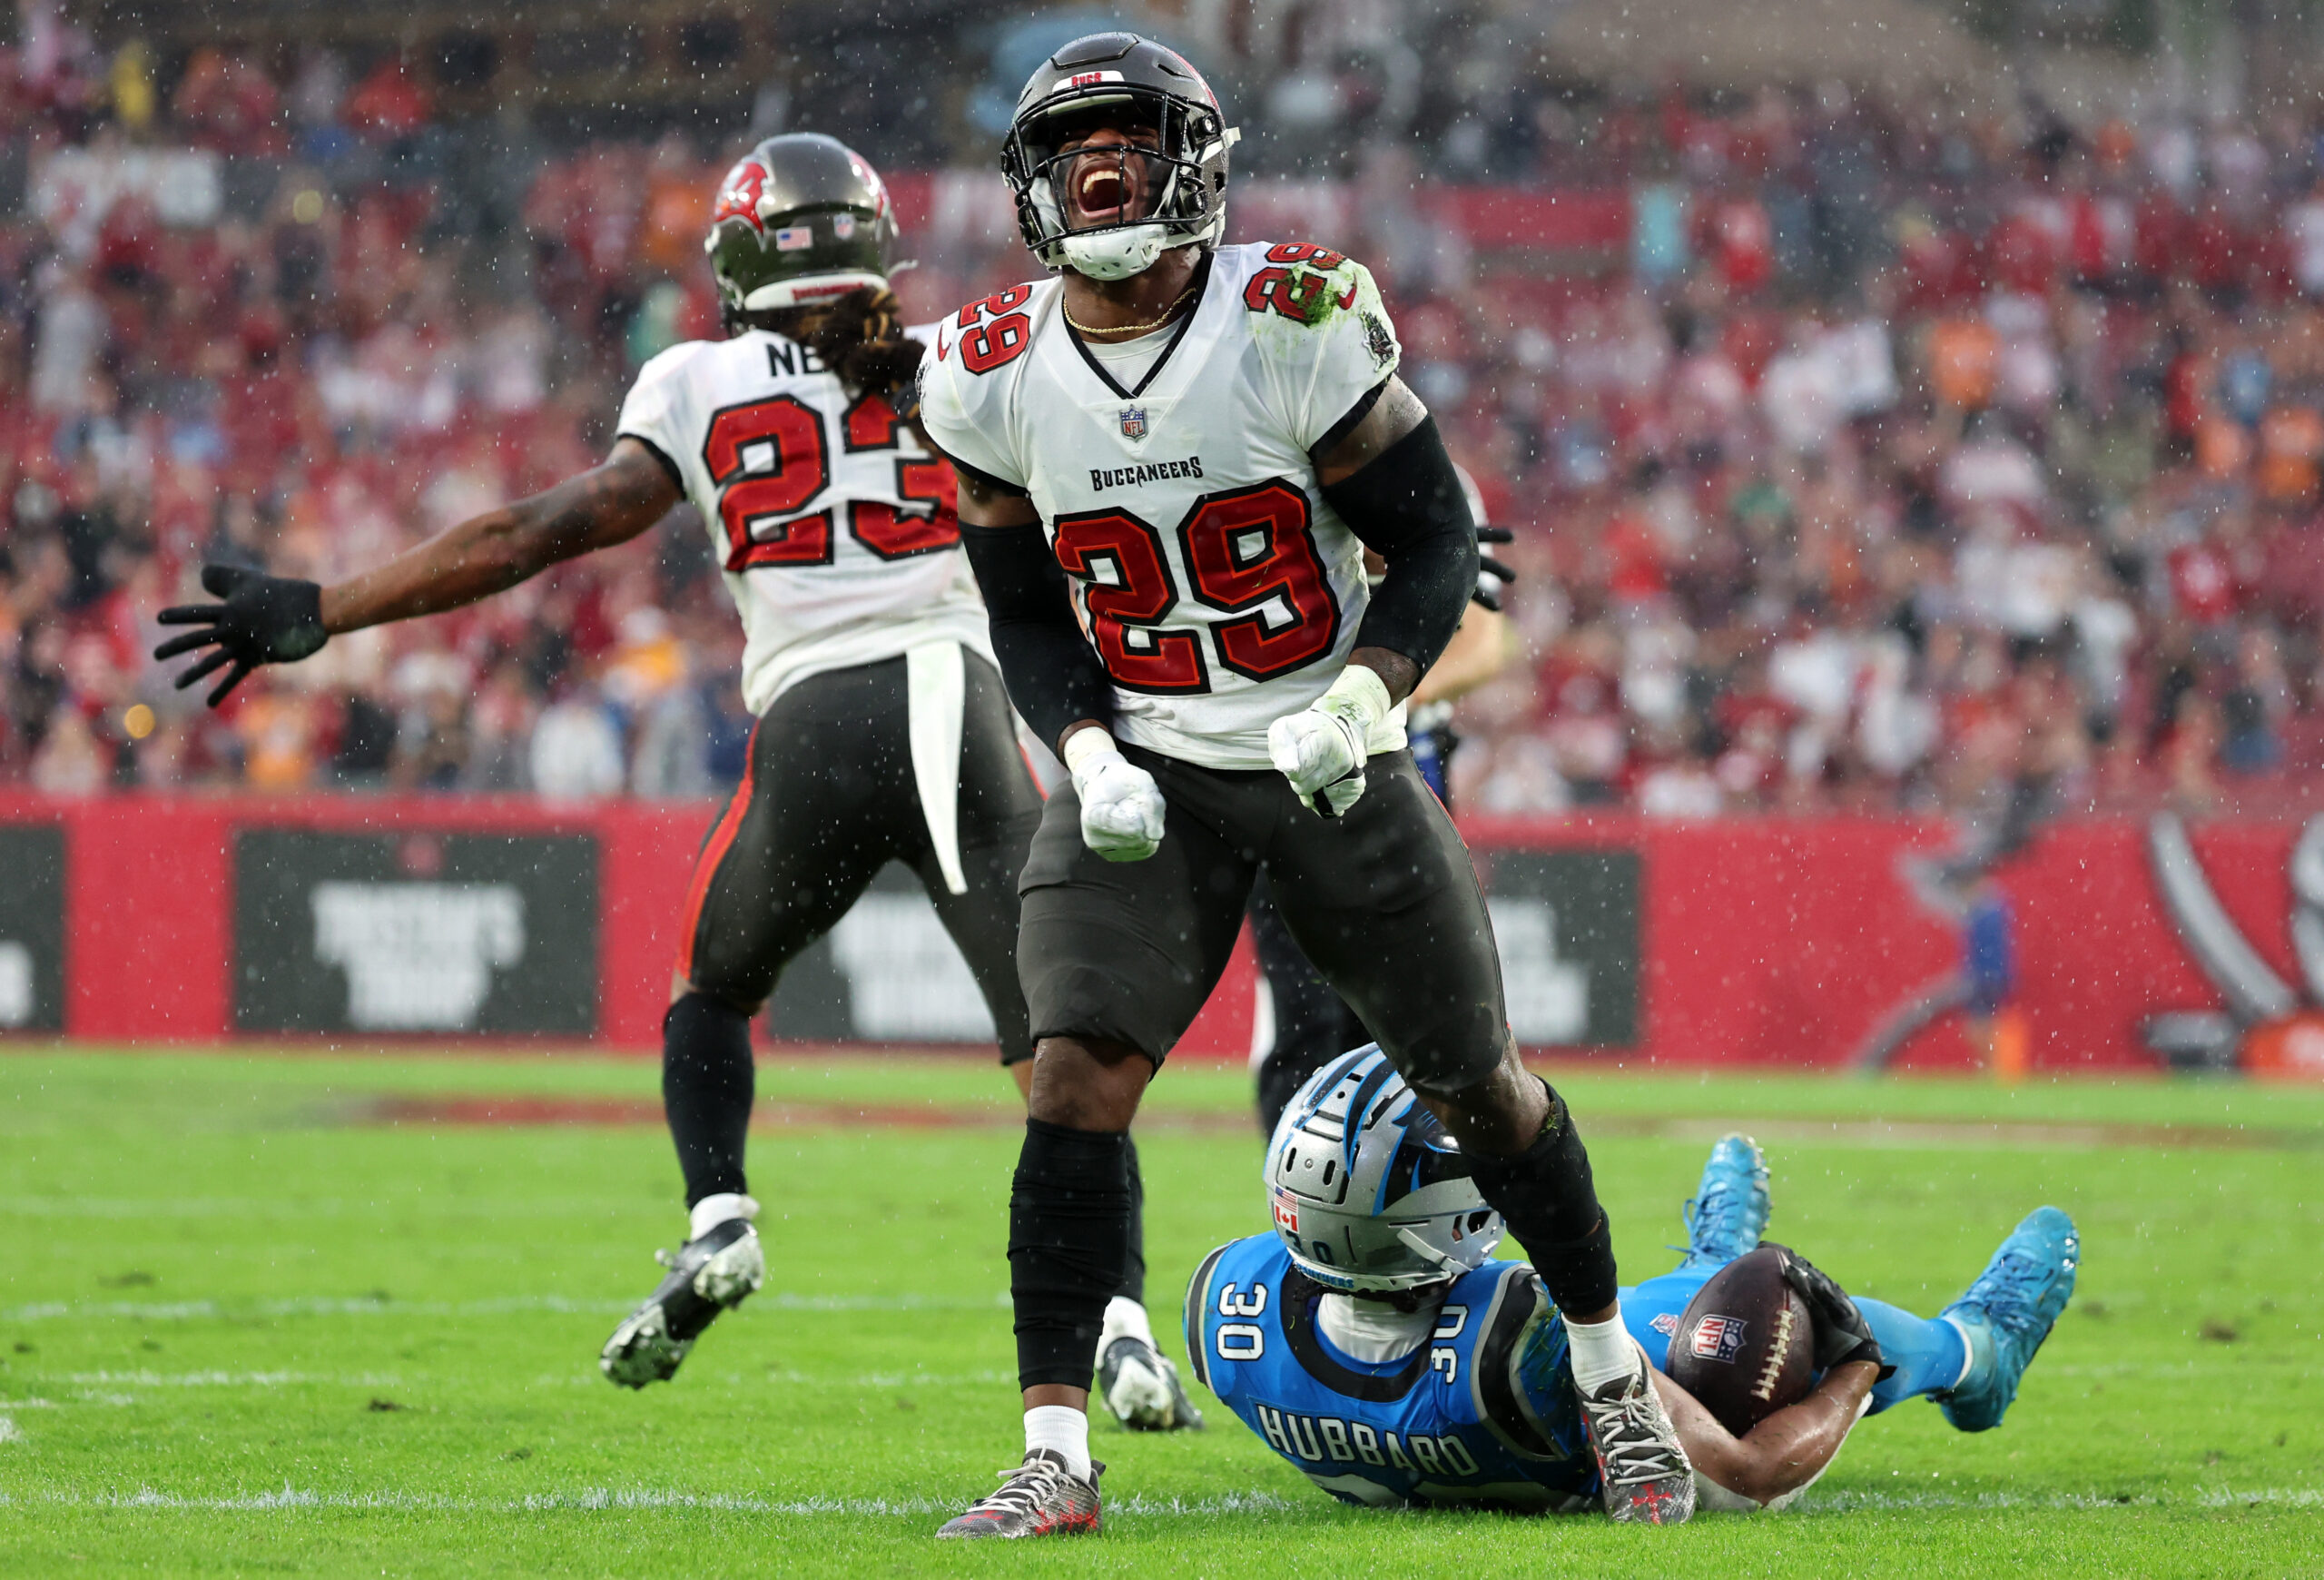 How to buy Tampa Bay Buccaneers vs. Carolina Panthers NFL Week 18 tickets